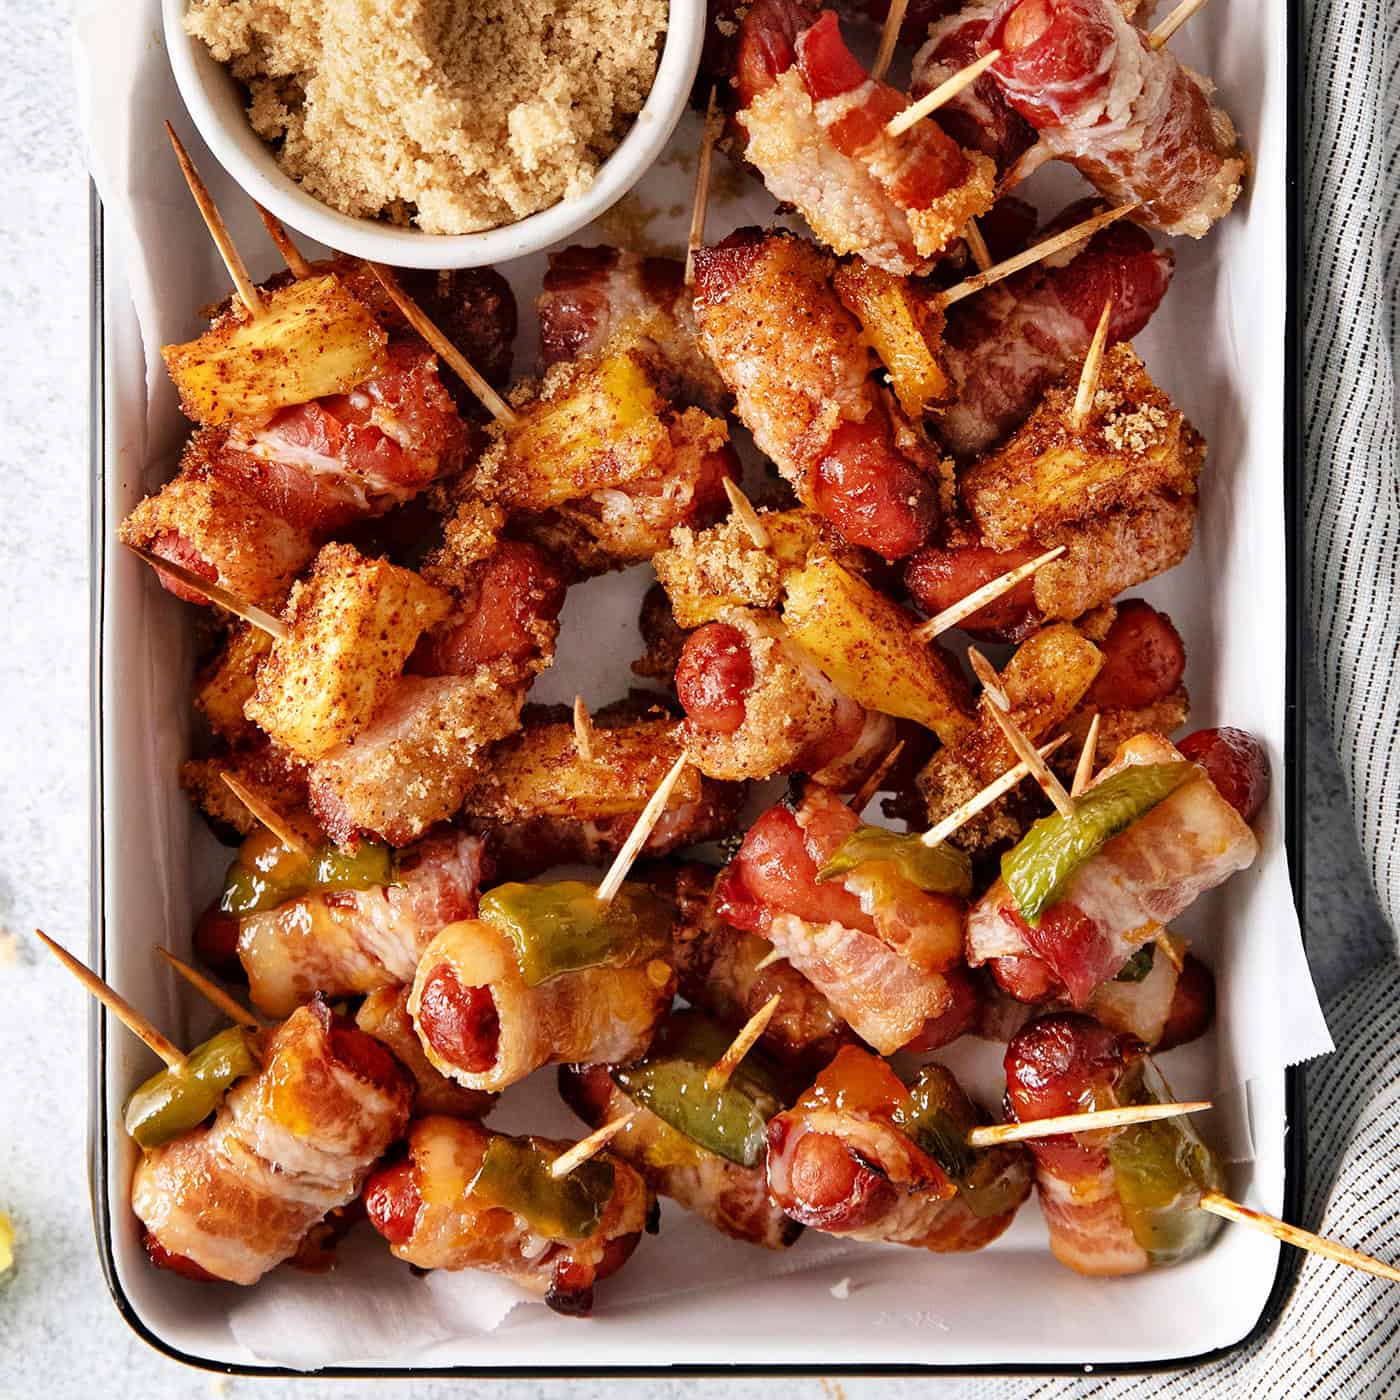 Bacon wrapped smokies with pineapple and jalapeno on a baking sheet